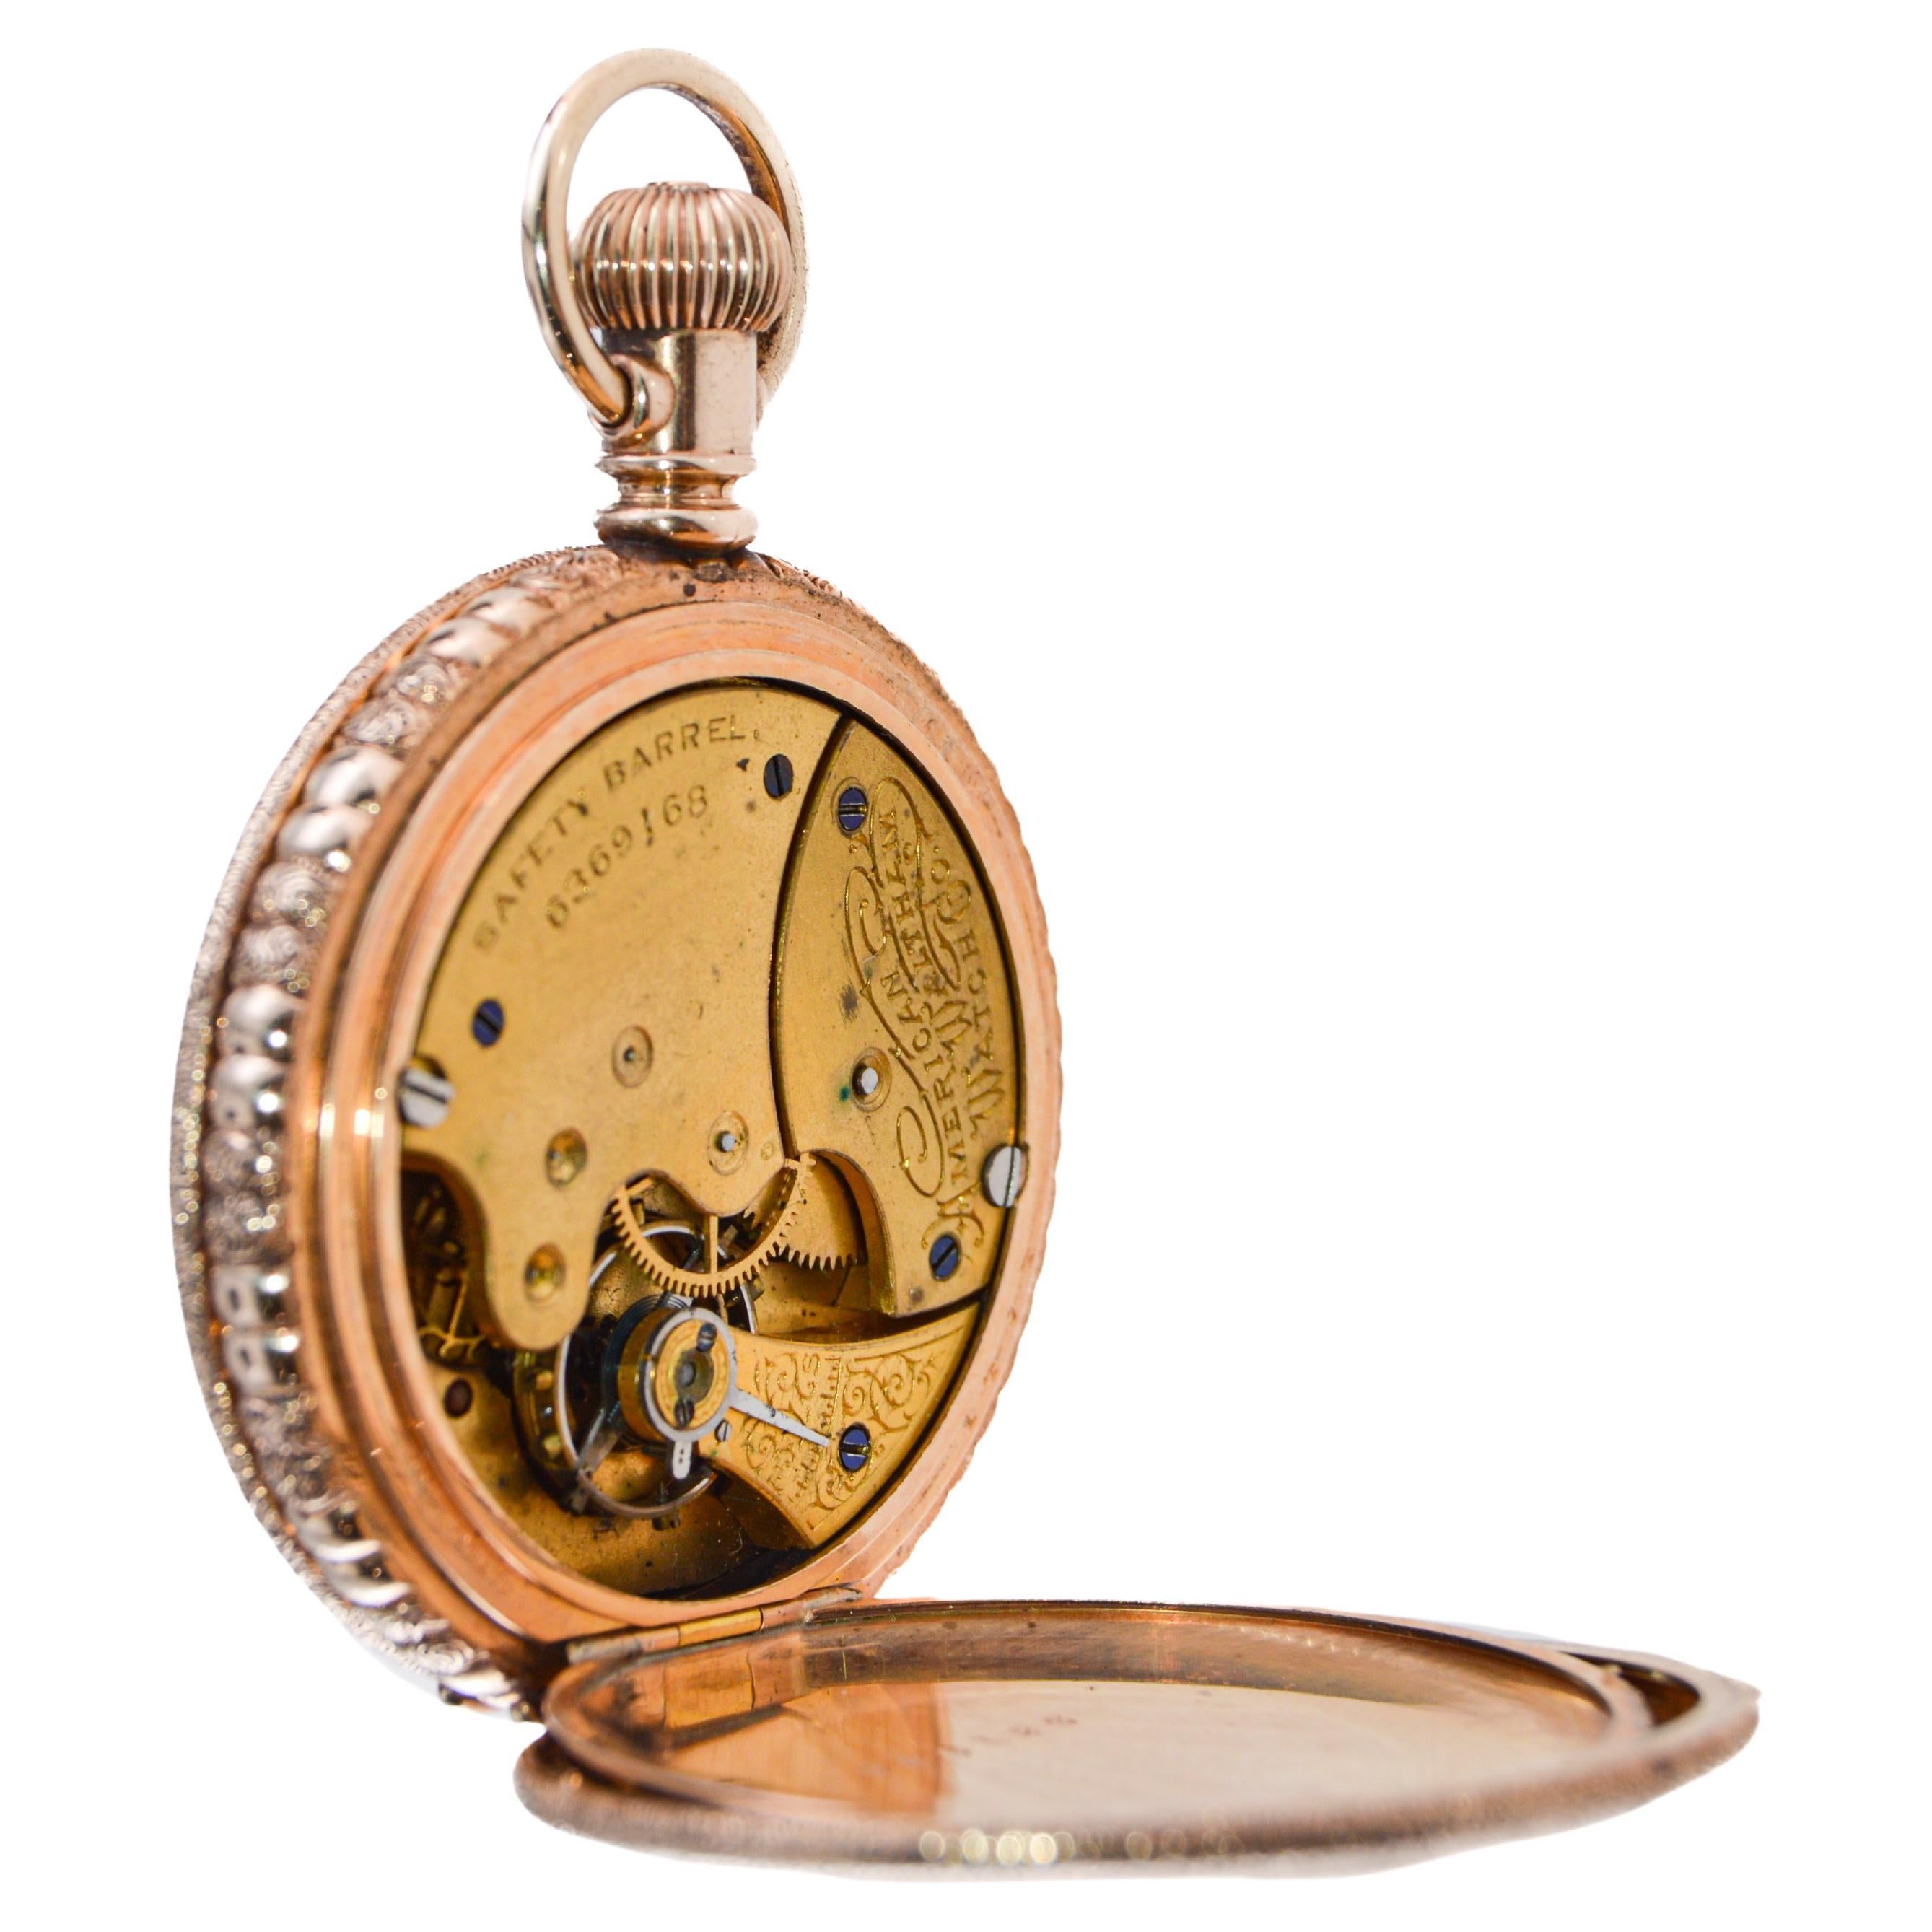 Elgin Gold Filled Pocket Watch From 1891 with Original Kiln Fired Enamel Dial  10